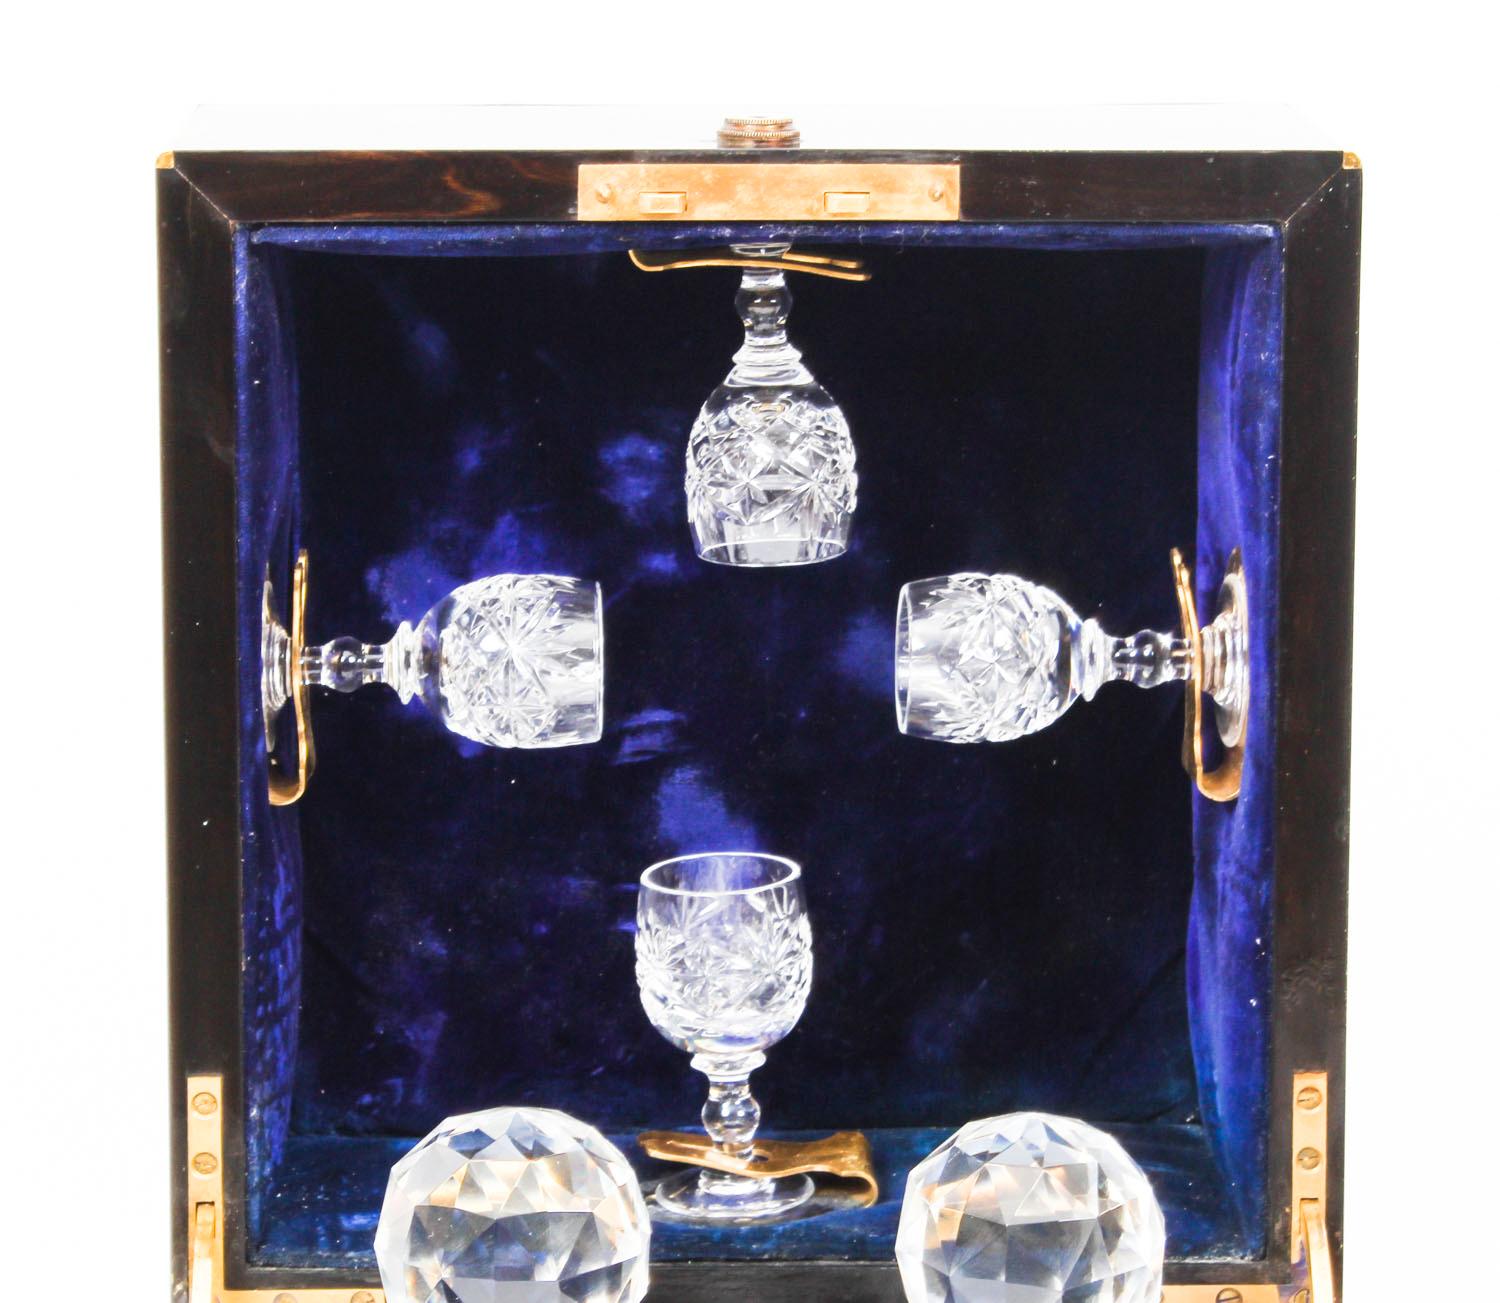 This is an antique Victorian coromandel wood and ormolu strung four bottle decanter box, late 19th century in date.

The interior lined in plush blue velvet, the hinged lid with four ormolu wine glass holders, the front is hinged to the sides with